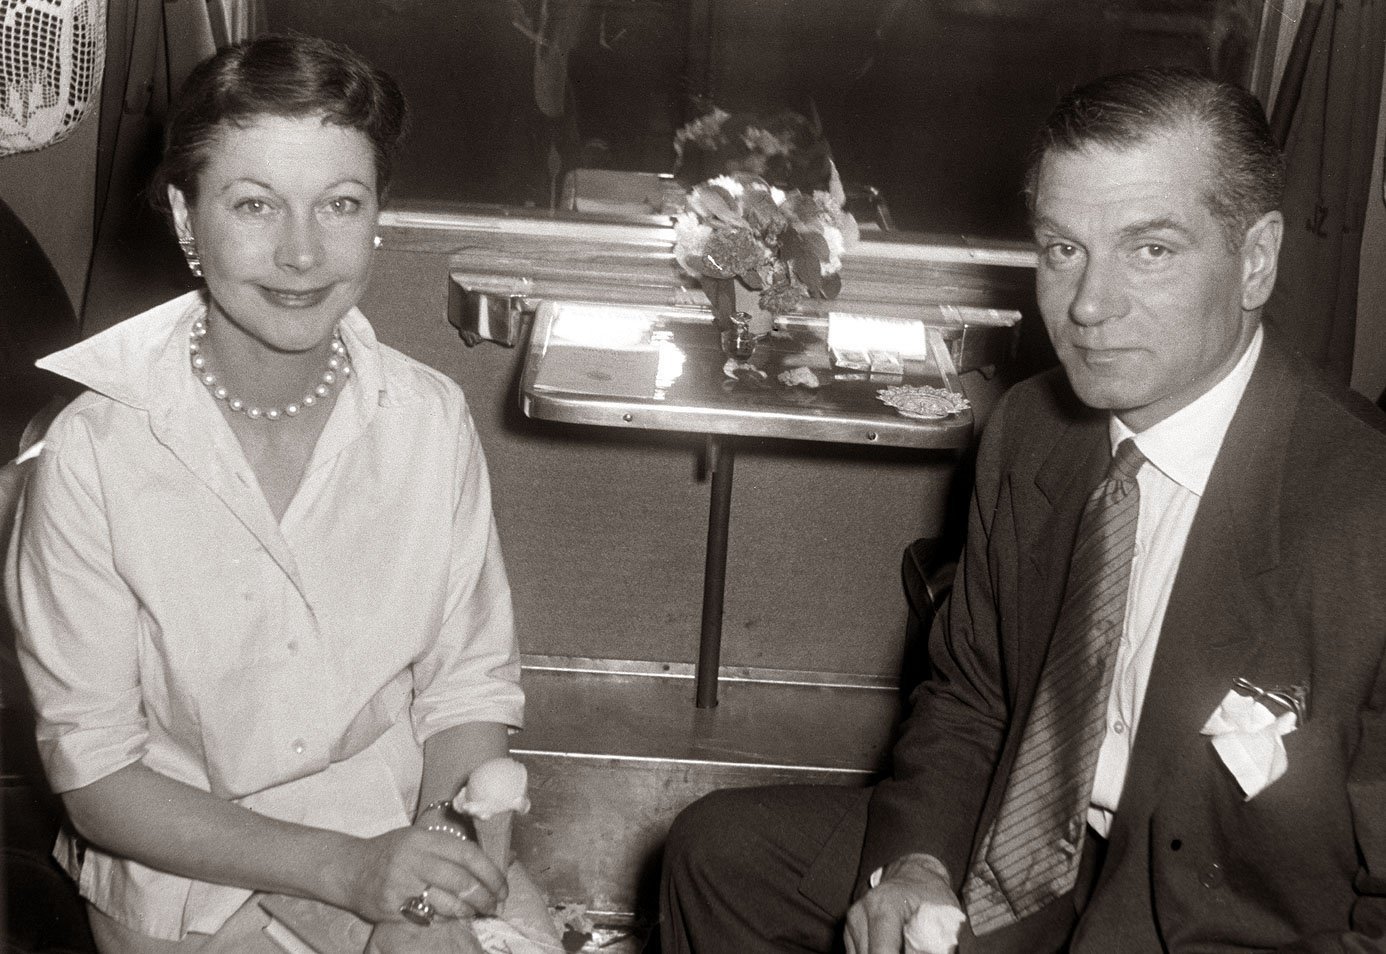 ivien Leigh and Laurence Olivier on a train in Maribor, 1957 | Photo: Wikimedia Commons Images